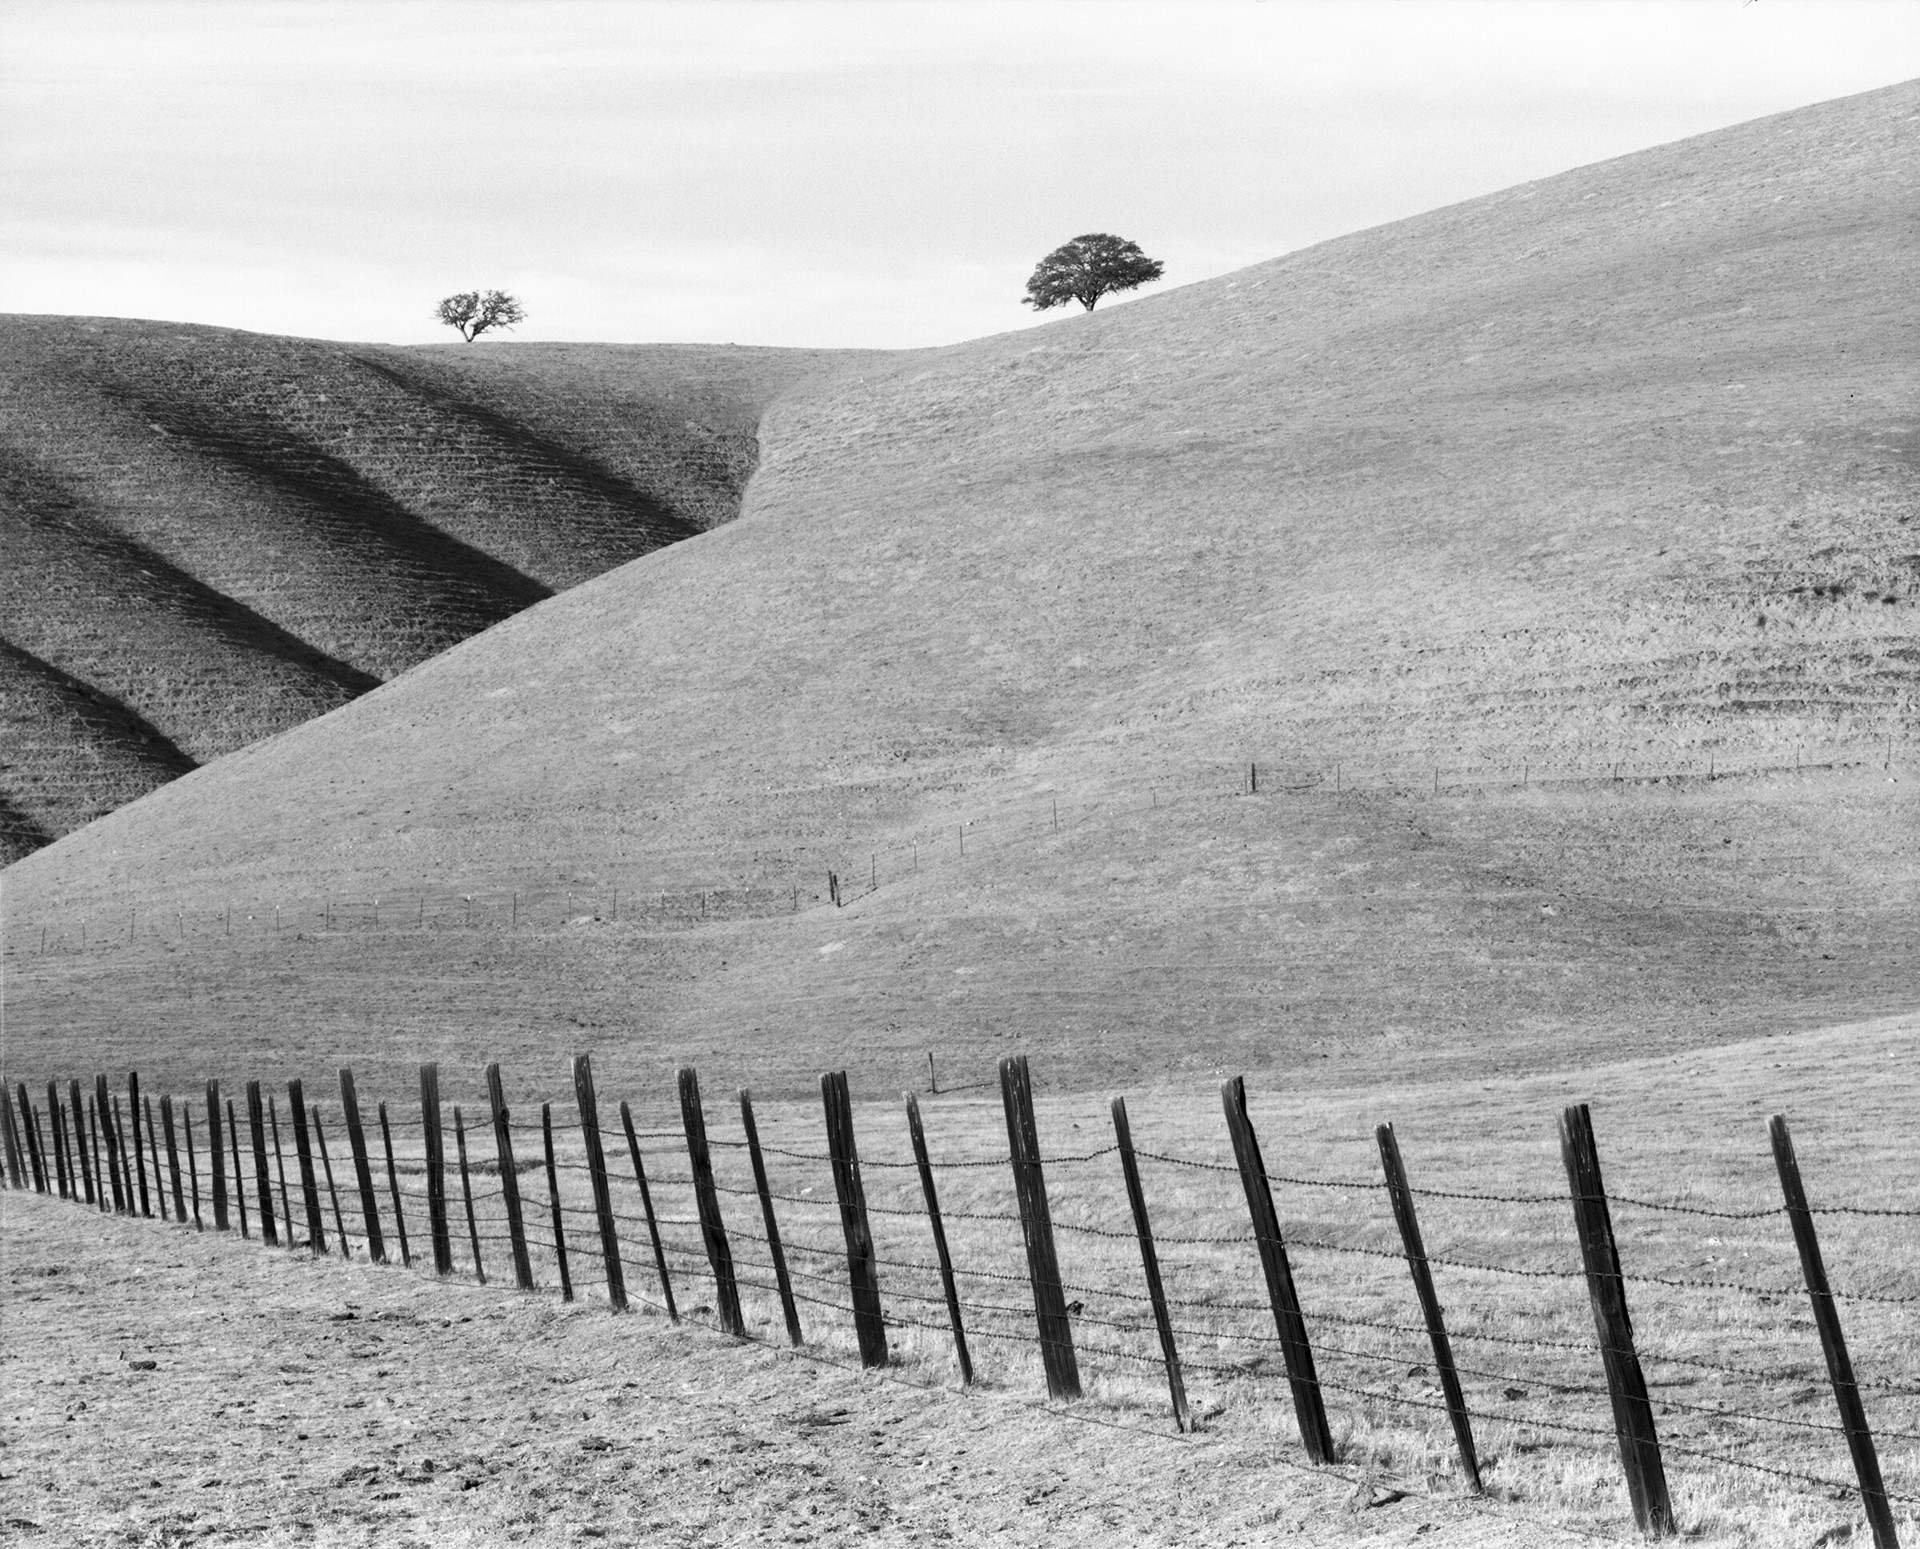 Fence and Two Trees along HWY 25 California by William Lemke